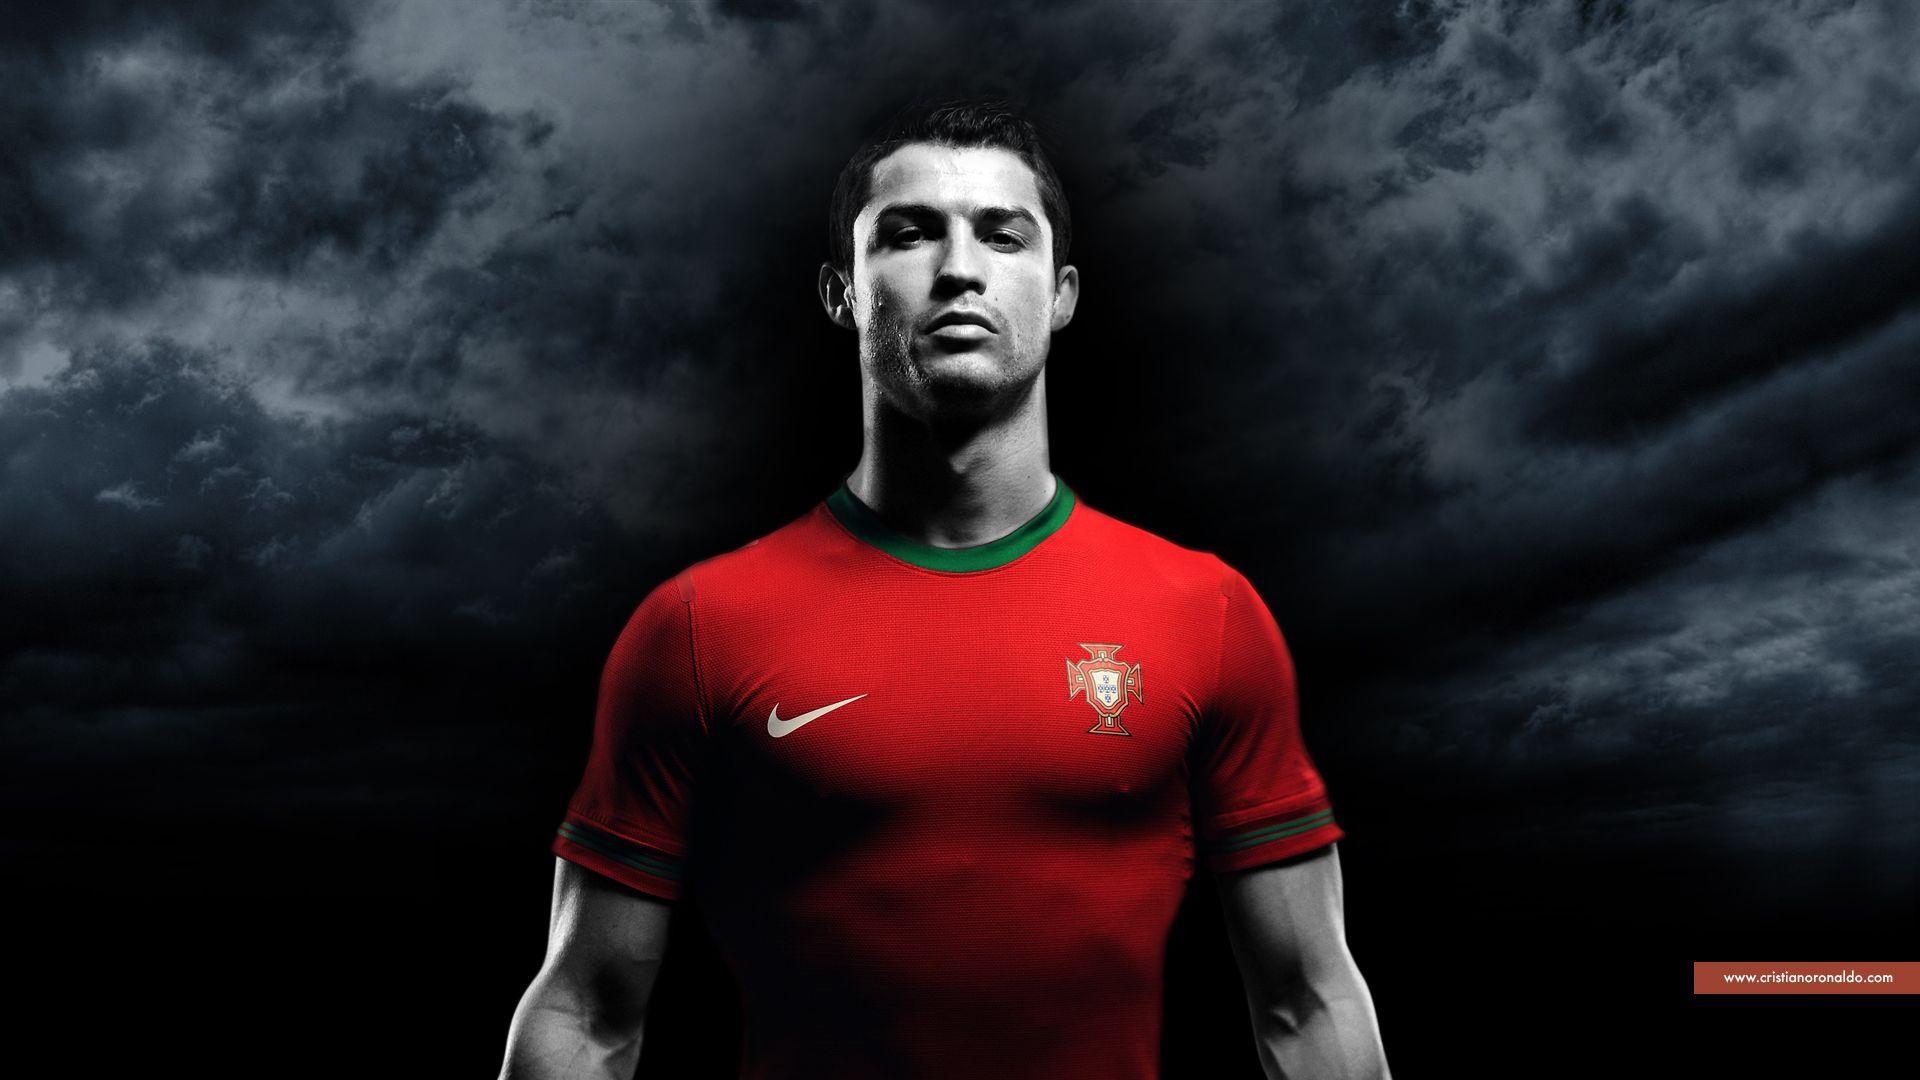 Cr7 Wallpaper (1920×1080). Soccer: Players & Coaches